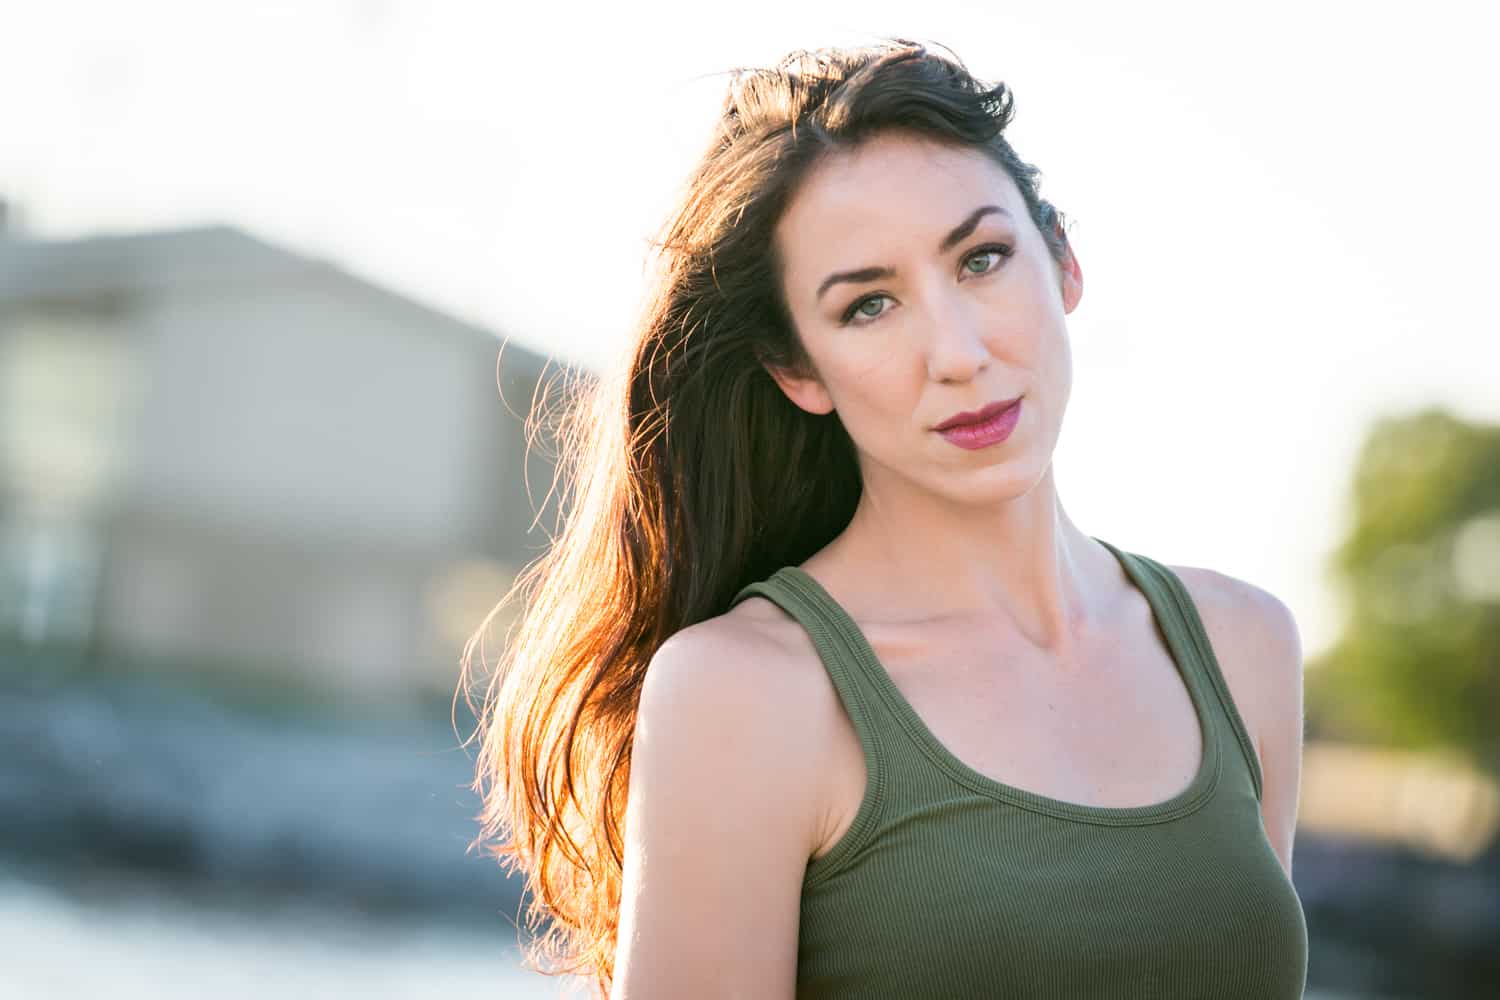 Acting headshot of model with long dark hair and olive tank top